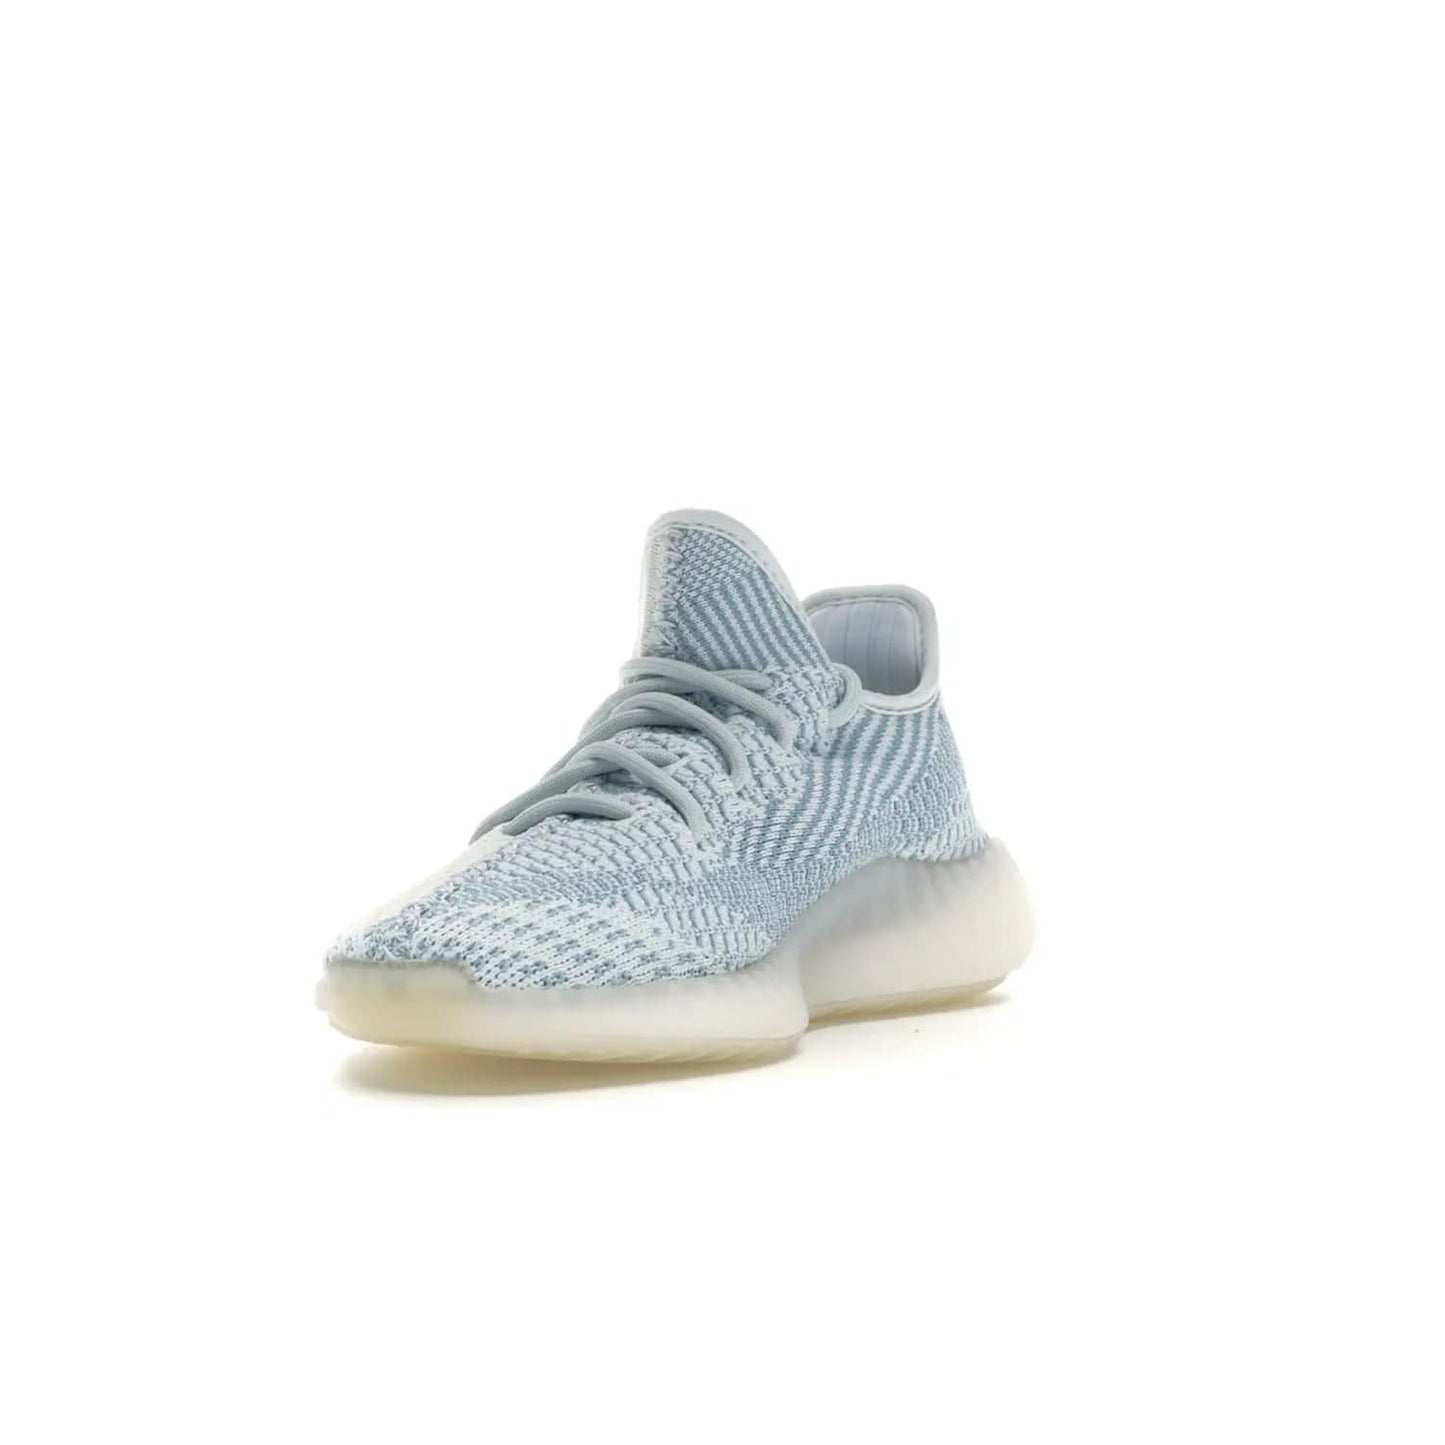 adidas Yeezy Boost 350 V2 Cloud White (Non-Reflective) - Image 13 - Only at www.BallersClubKickz.com - Adidas Yeezy Boost 350 V2 Cloud White (Non-Reflective) features Primeknit fabric and a unique, eye-catching design of cream, bluish-white, and transparent strip. Step out in timeless style with this eye-catching sneaker.